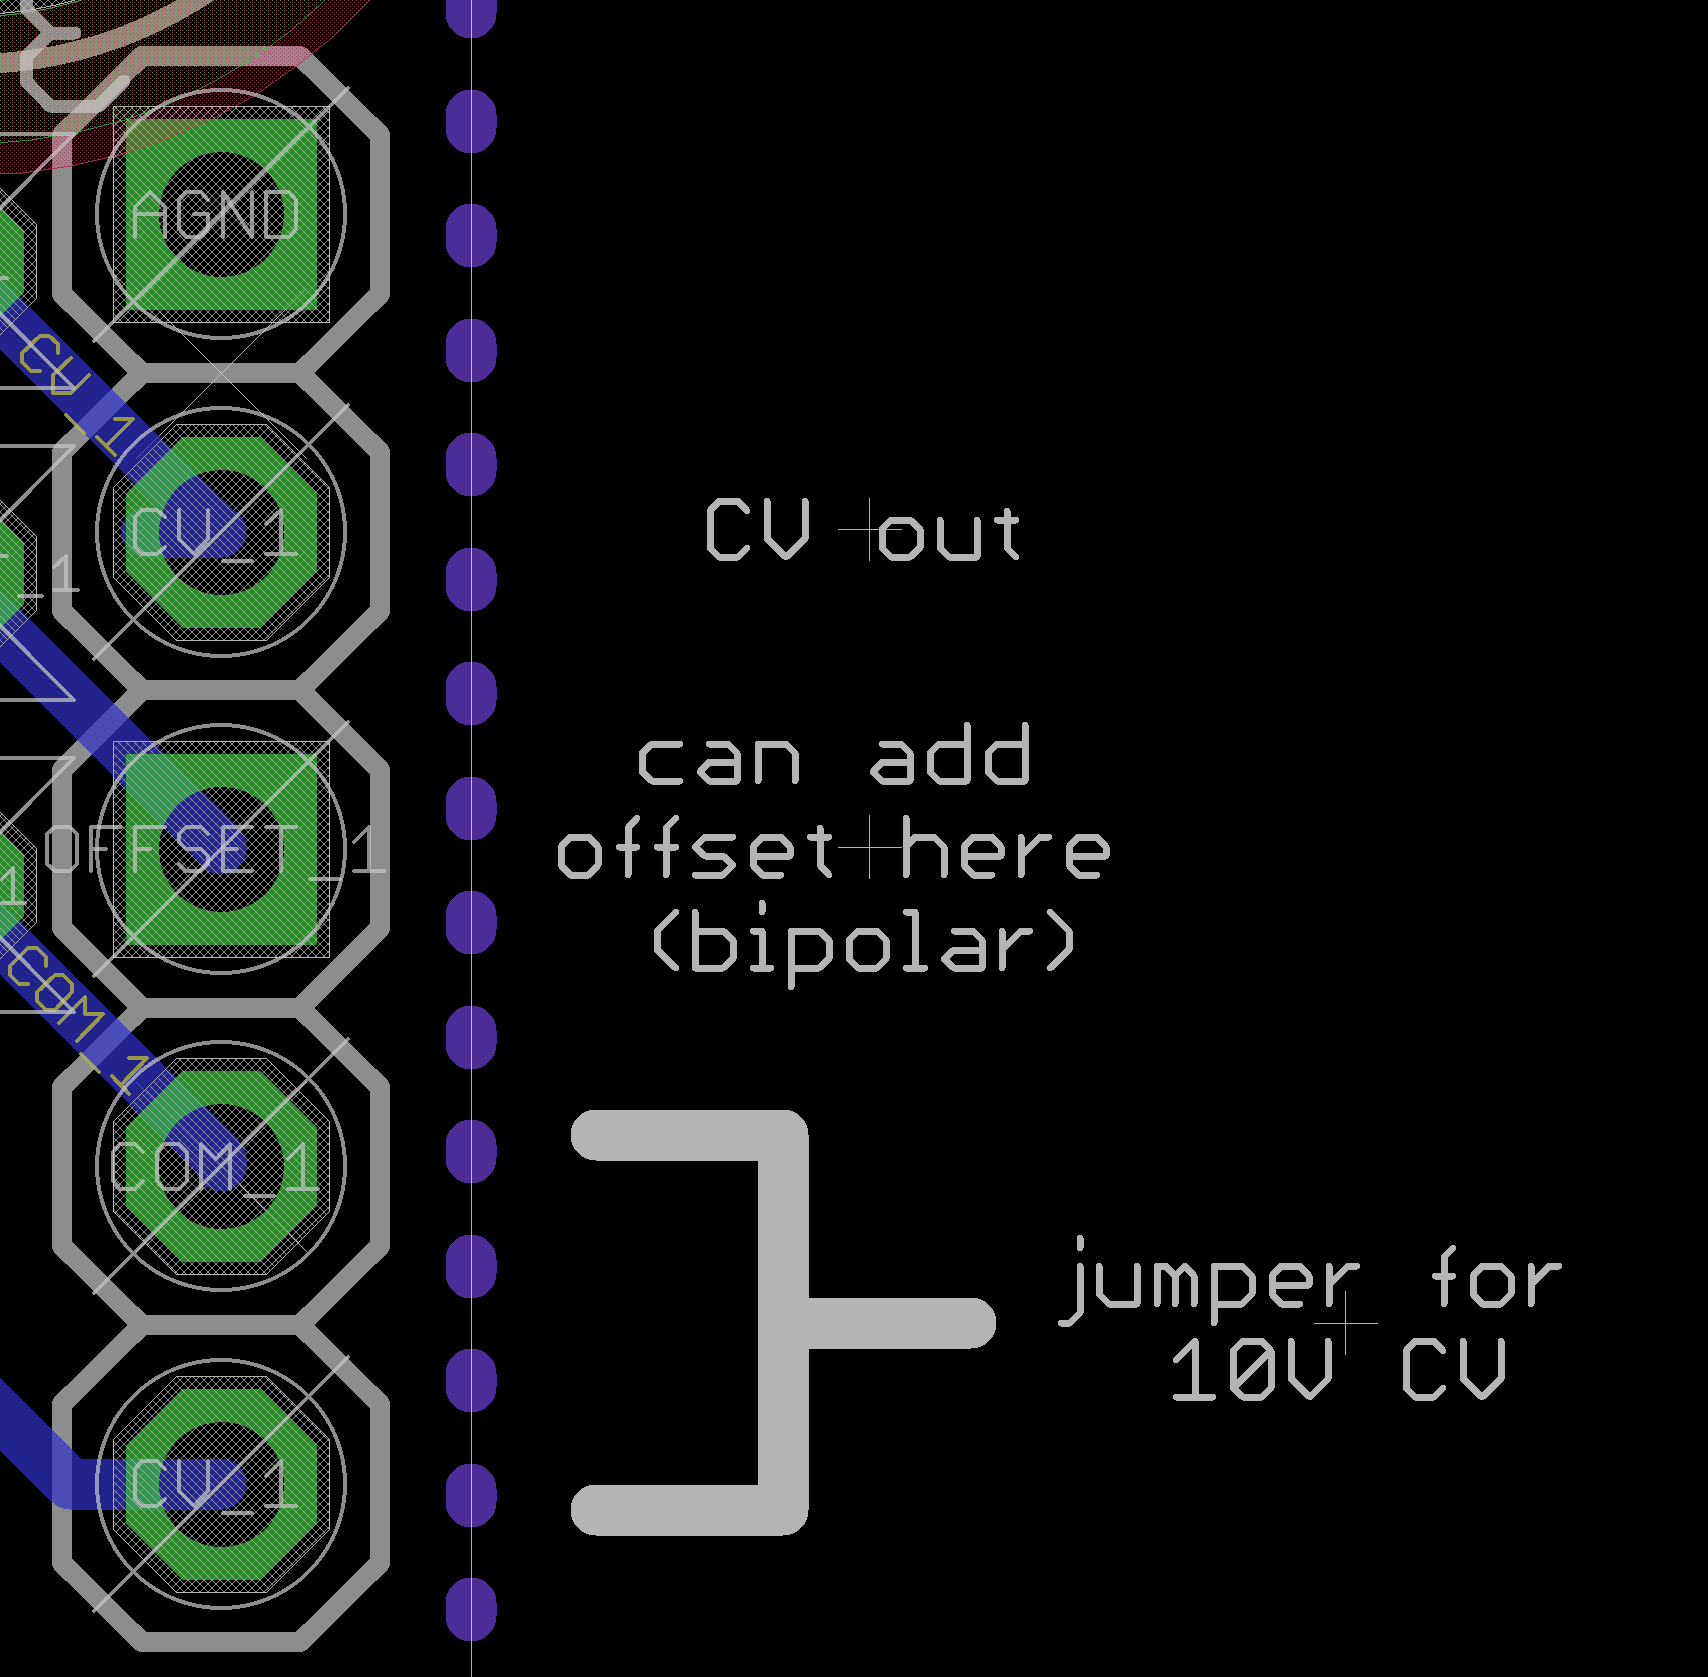 aout4:jumpers.png